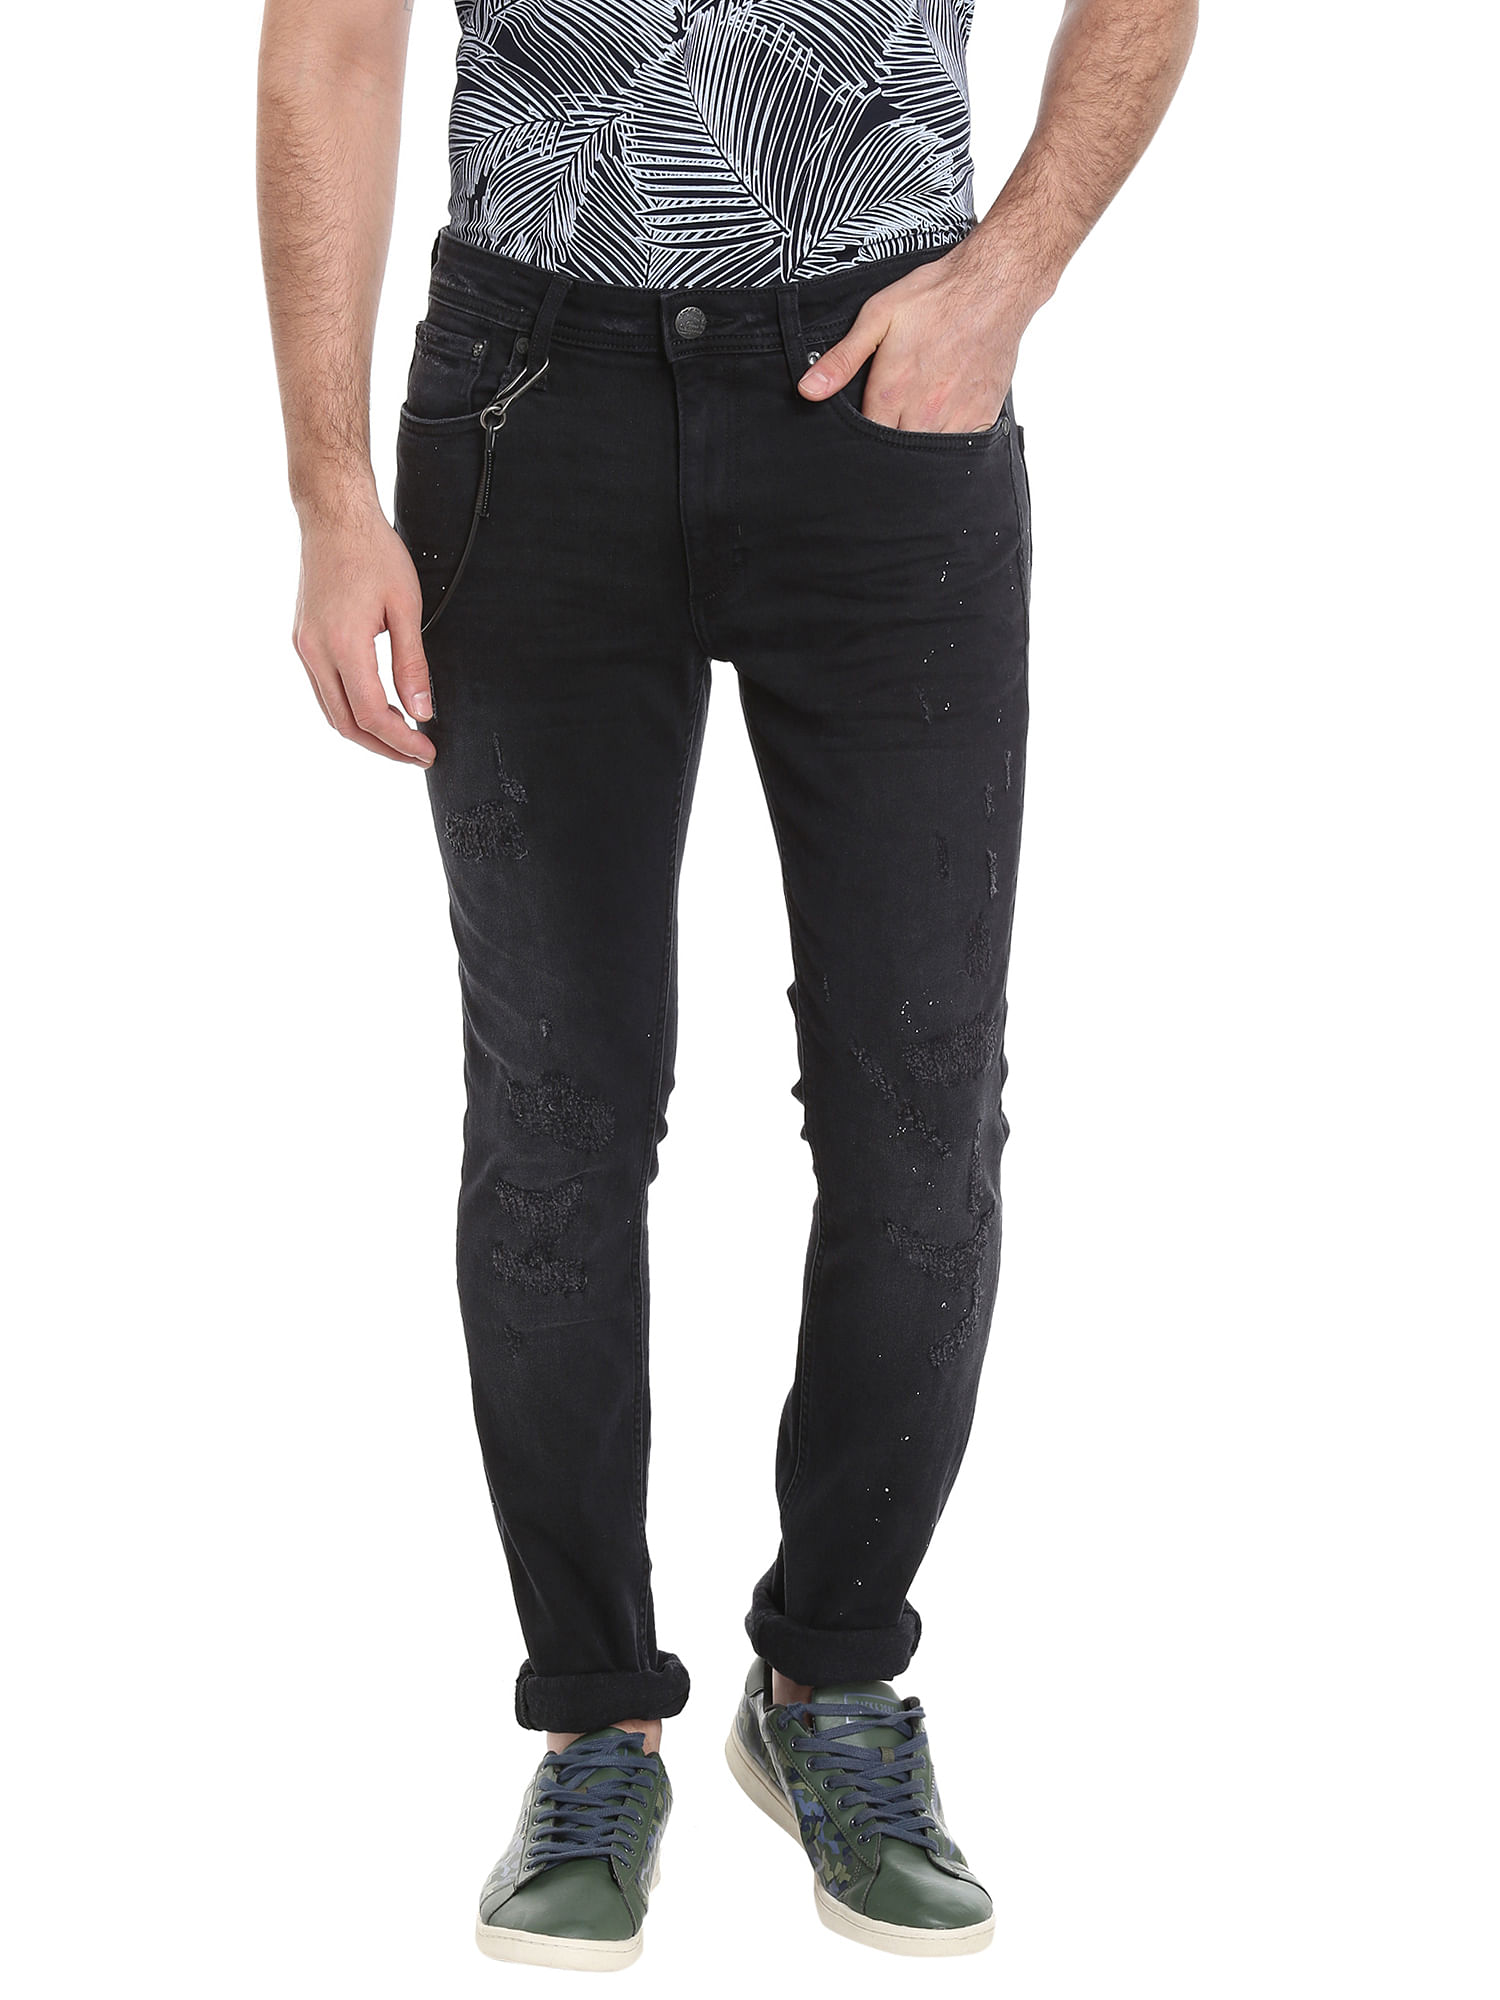 buy distressed jeans online